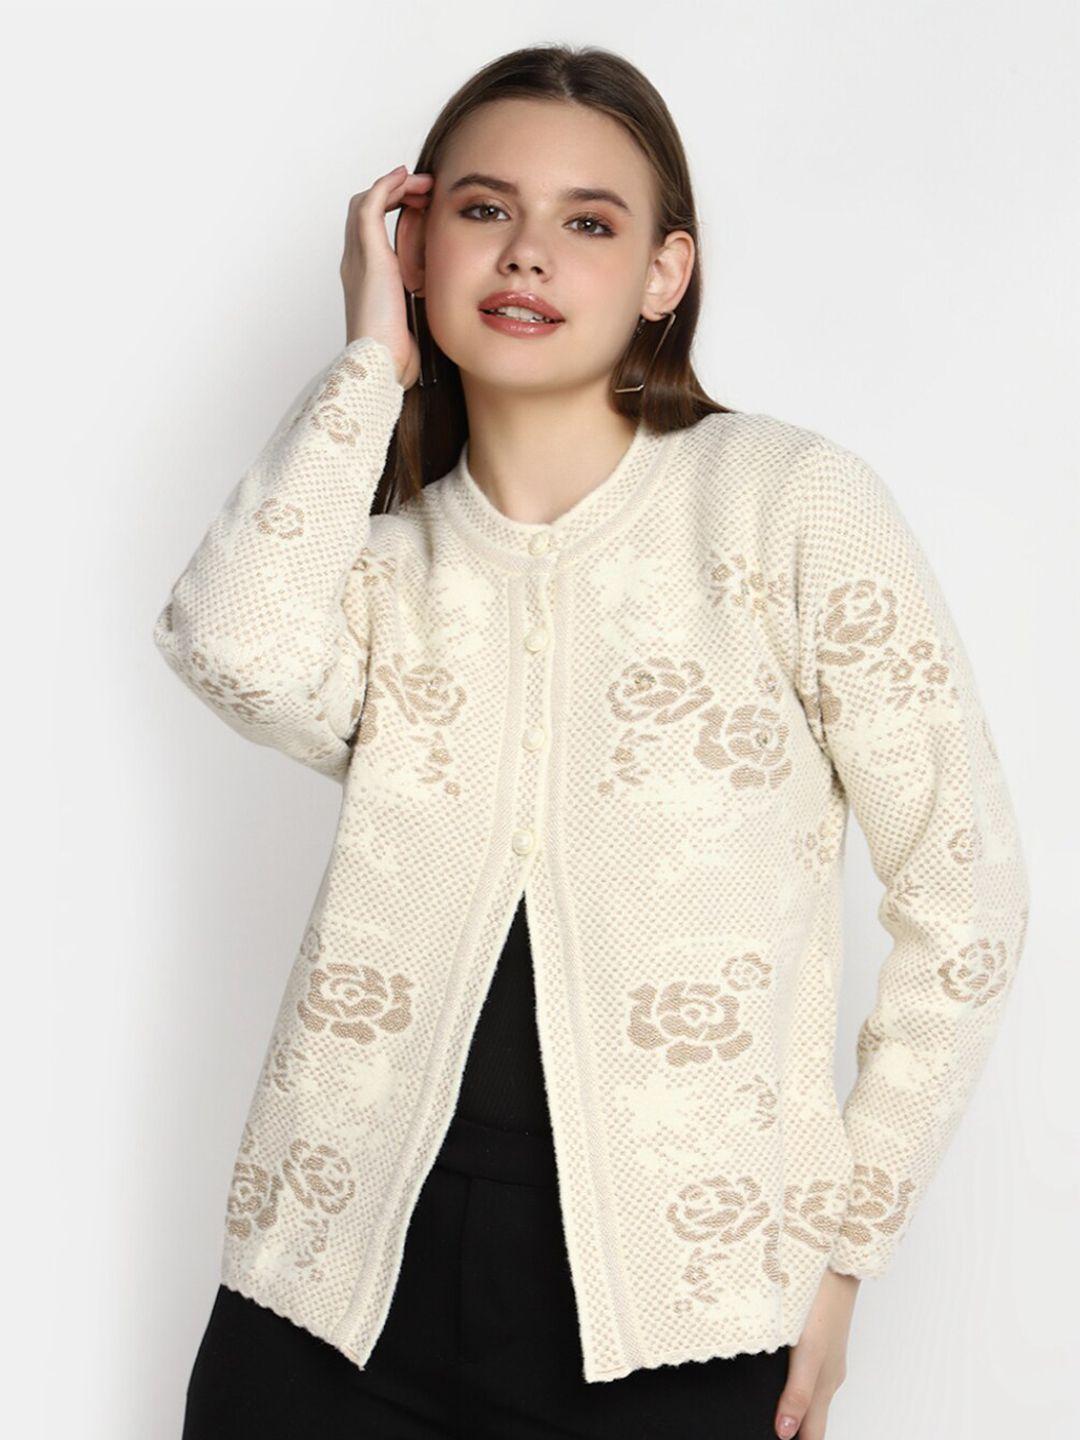 v-mart floral embroidered beads & stones suede cardigan sweater